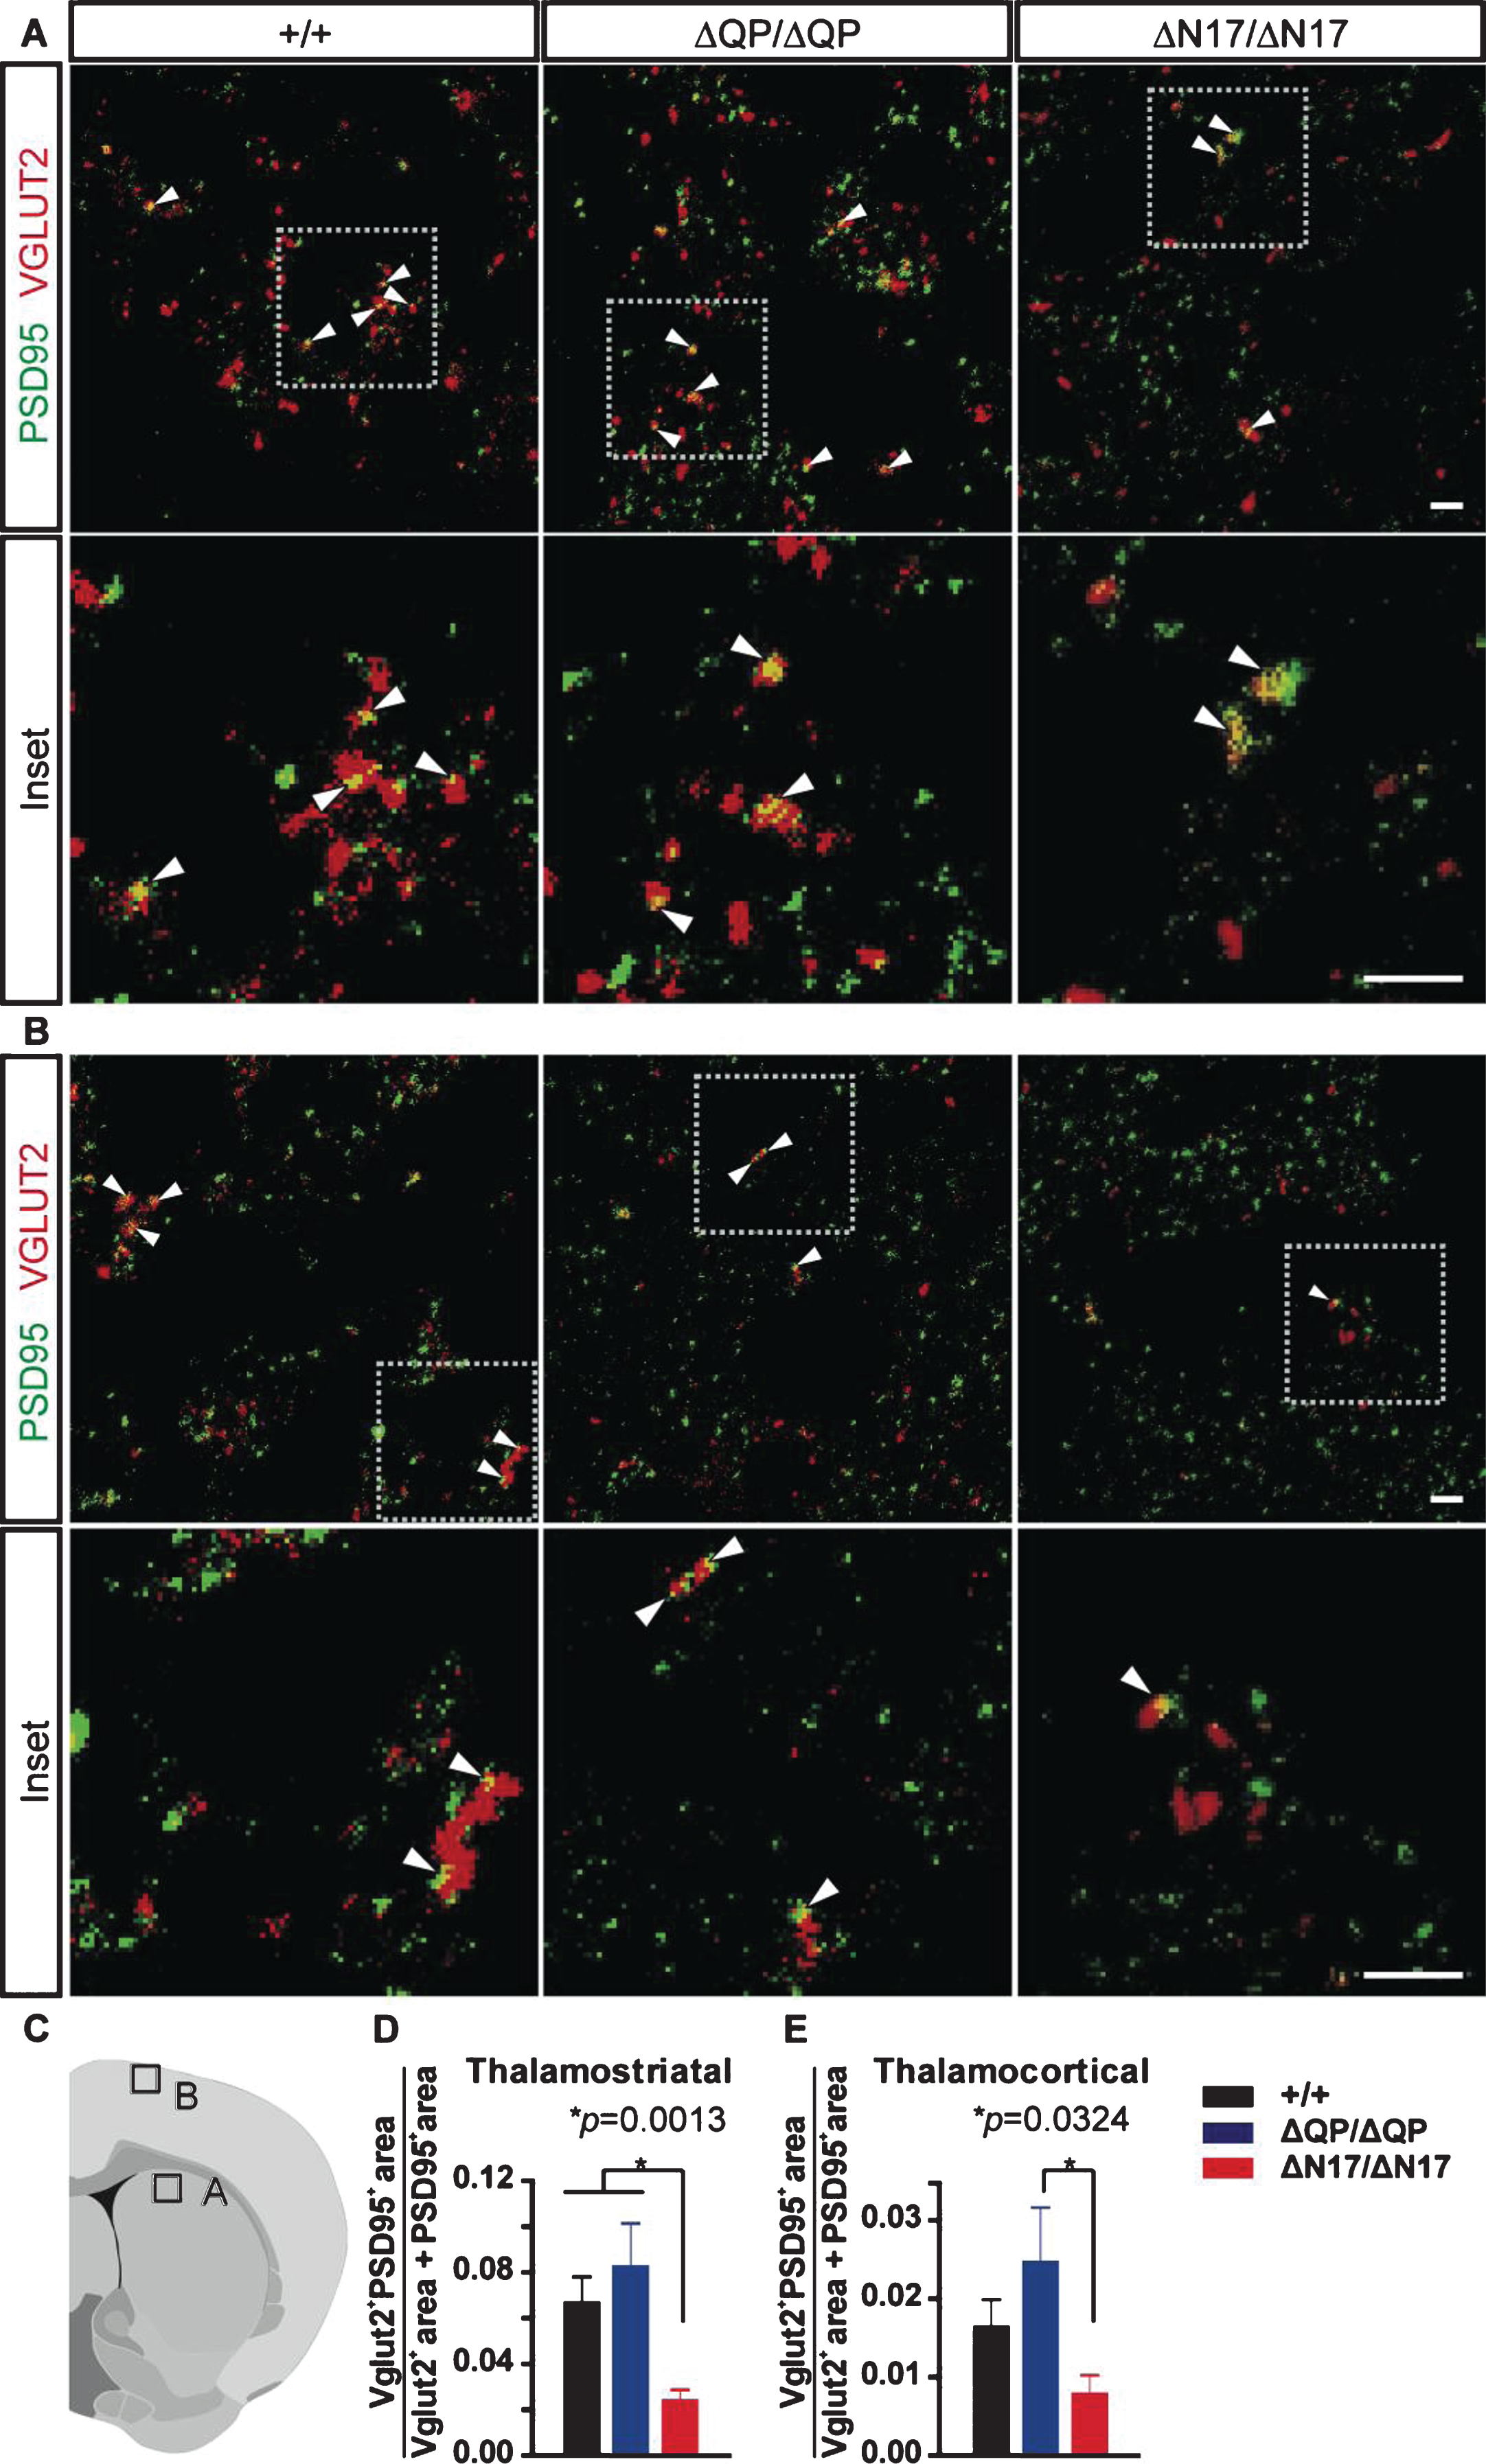 Synapse quantification in the brains of 24-month-old Htt+/+ (+/+), HttΔQP/ΔQP (ΔQP/ΔQP), and HttΔN17/ΔN17 (ΔN17/ΔN17) mice. (A, B) Representative images from brain sections immunostained with PSD-95 (green) and Vglut2 (red). (A) Dorsal striatum. Arrowheads indicate co-localized PSD-95 and Vglut2 (yellow), which represent thalamostriatal synapses. Scale bar = 2μm. (B) Primary motor cortex (layers I/II). Arrowheads indicate co-localized PSD-95 and Vglut2, which represent thalamocortical synapses. Scale bar = 2μm. (C) Diagram illustrating the two brain regions imaged in (A, B). (D, E) Quantification of PSD-95/Vglut2 co-localization in the dorsal striatum (D) and primary motor cortex (E). HttΔN17/ΔN17 mice had reduced PSD-95+Vglut2+ synapses in the striatum compared to Htt+/+ controls (Htt+/+: 0.05887±0.00683, HttΔQP/ΔQP: 0.07323±0.01249, HttΔN17/ΔN17: 0.02940±0.00391, p = 0.0013). HttΔN17/ΔN17 mice also exhibited a trend toward reduced PSD-95+Vglut2+ synapses in the primary motor cortex compared to Htt+/+ controls and a significant reduction compared to HttΔQP/ΔQP mice (Htt+/+: 0.01652±0.0034, HttΔQP/ΔQP: 0.02490±0.00676, HttΔN17/ΔN17: 0.008080±0.00219, p = 0.0324) (mean±SEM, n = 23–25 images from 3 mice/genotype, 1-way ANOVA).